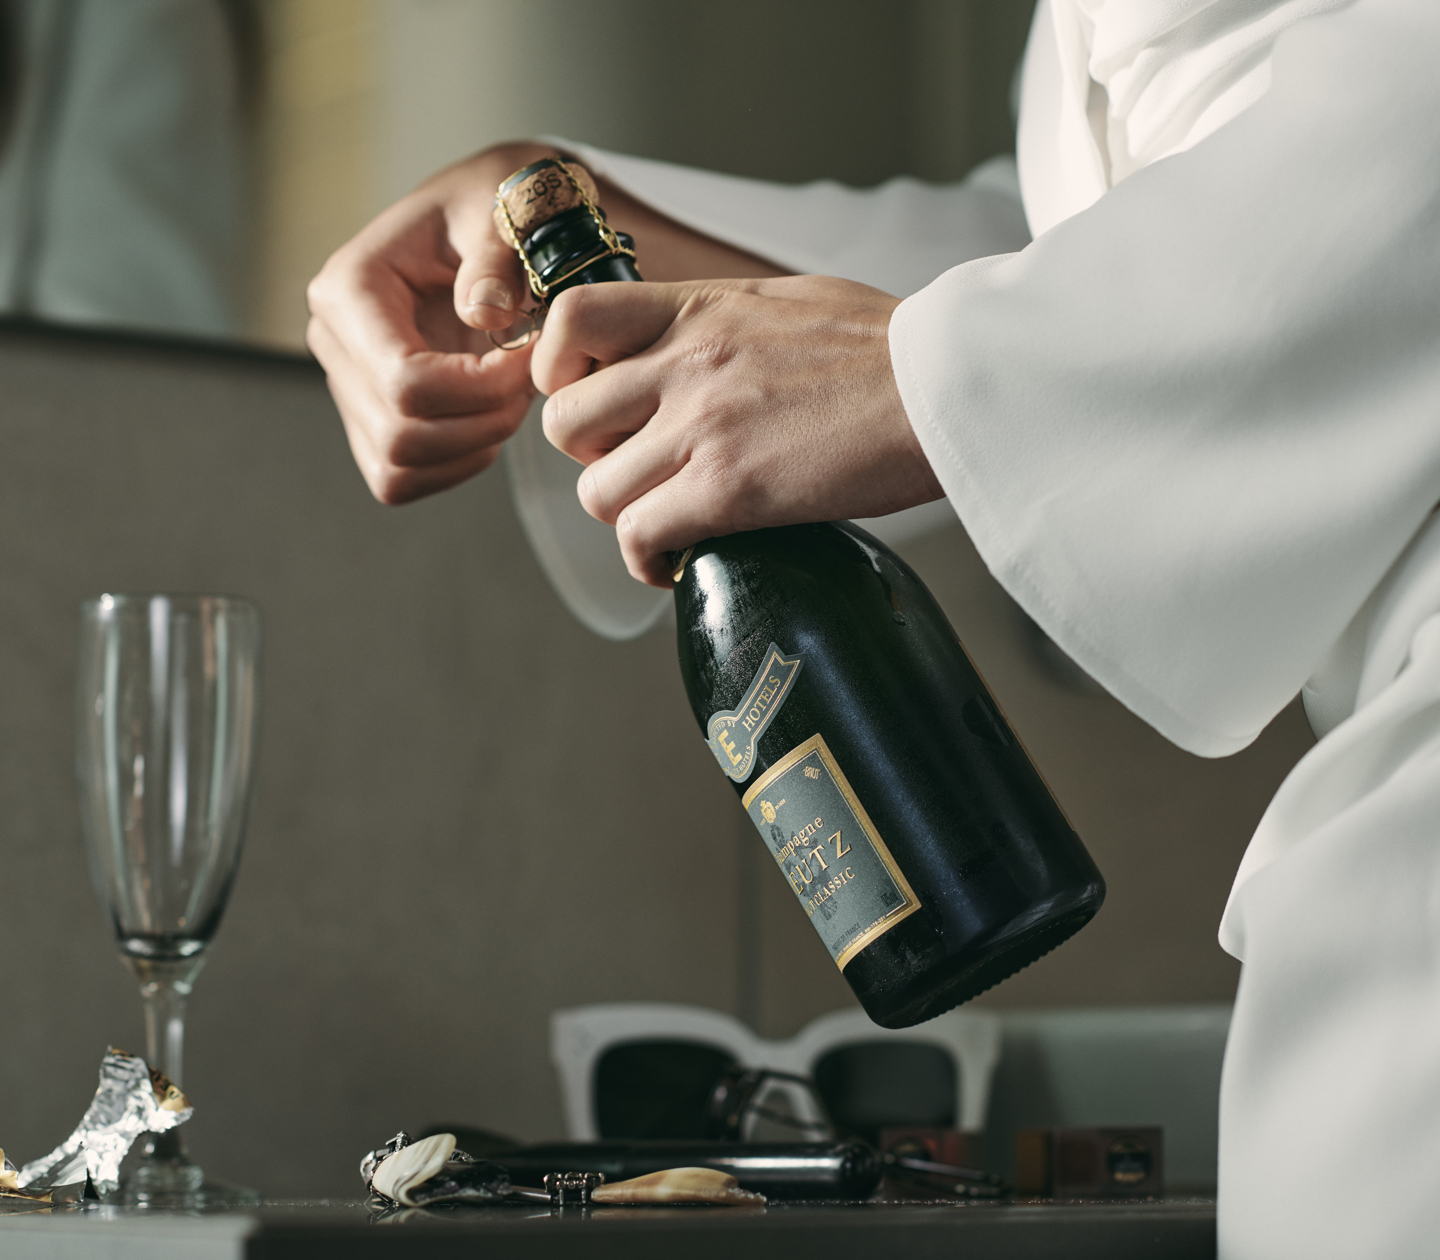 Waiter opens a bottle of champagne